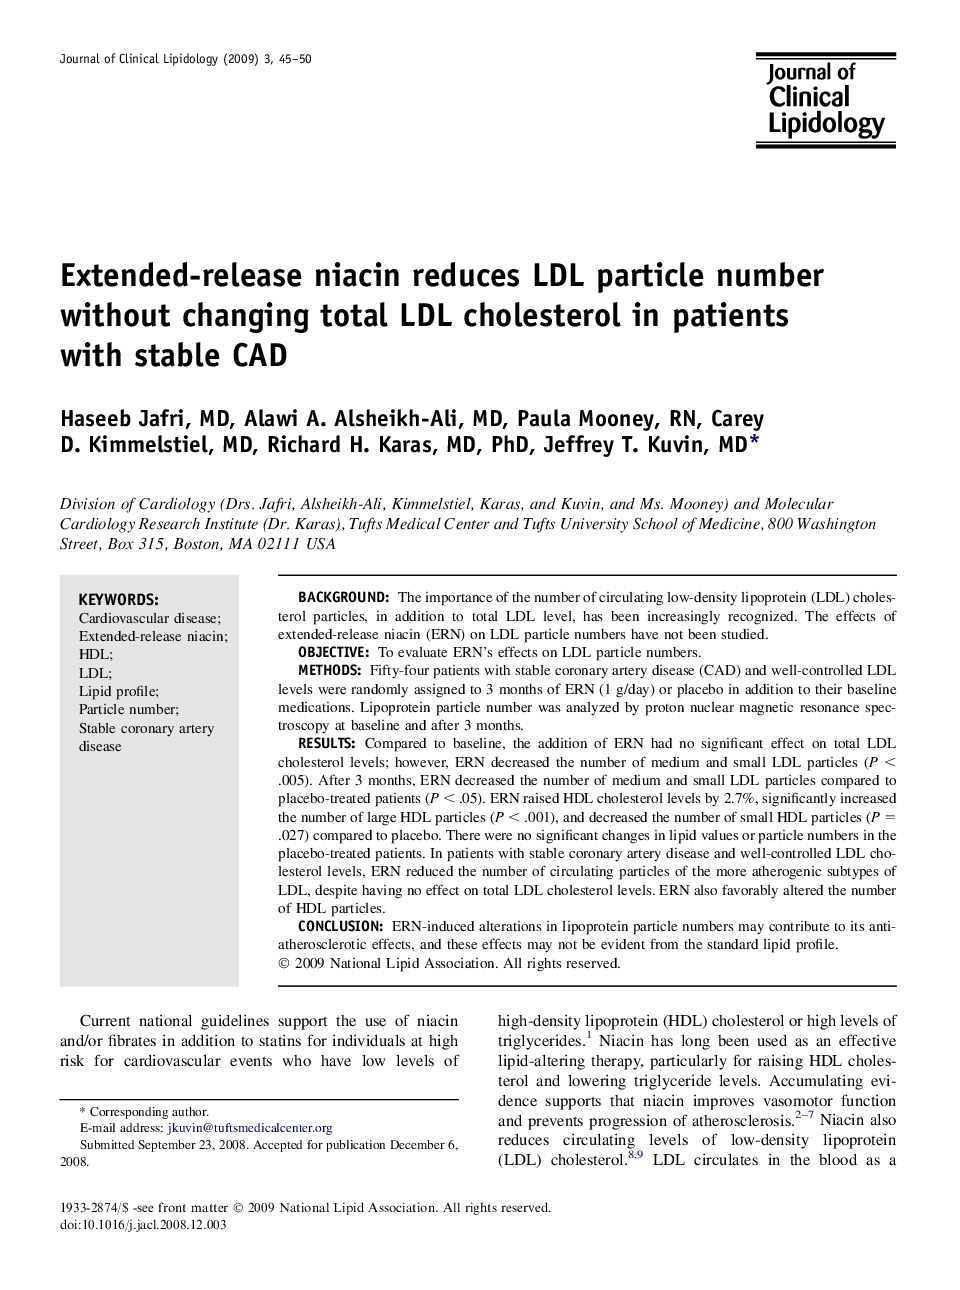 Extended-release niacin reduces LDL particle number without changing total LDL cholesterol in patients with stable CAD